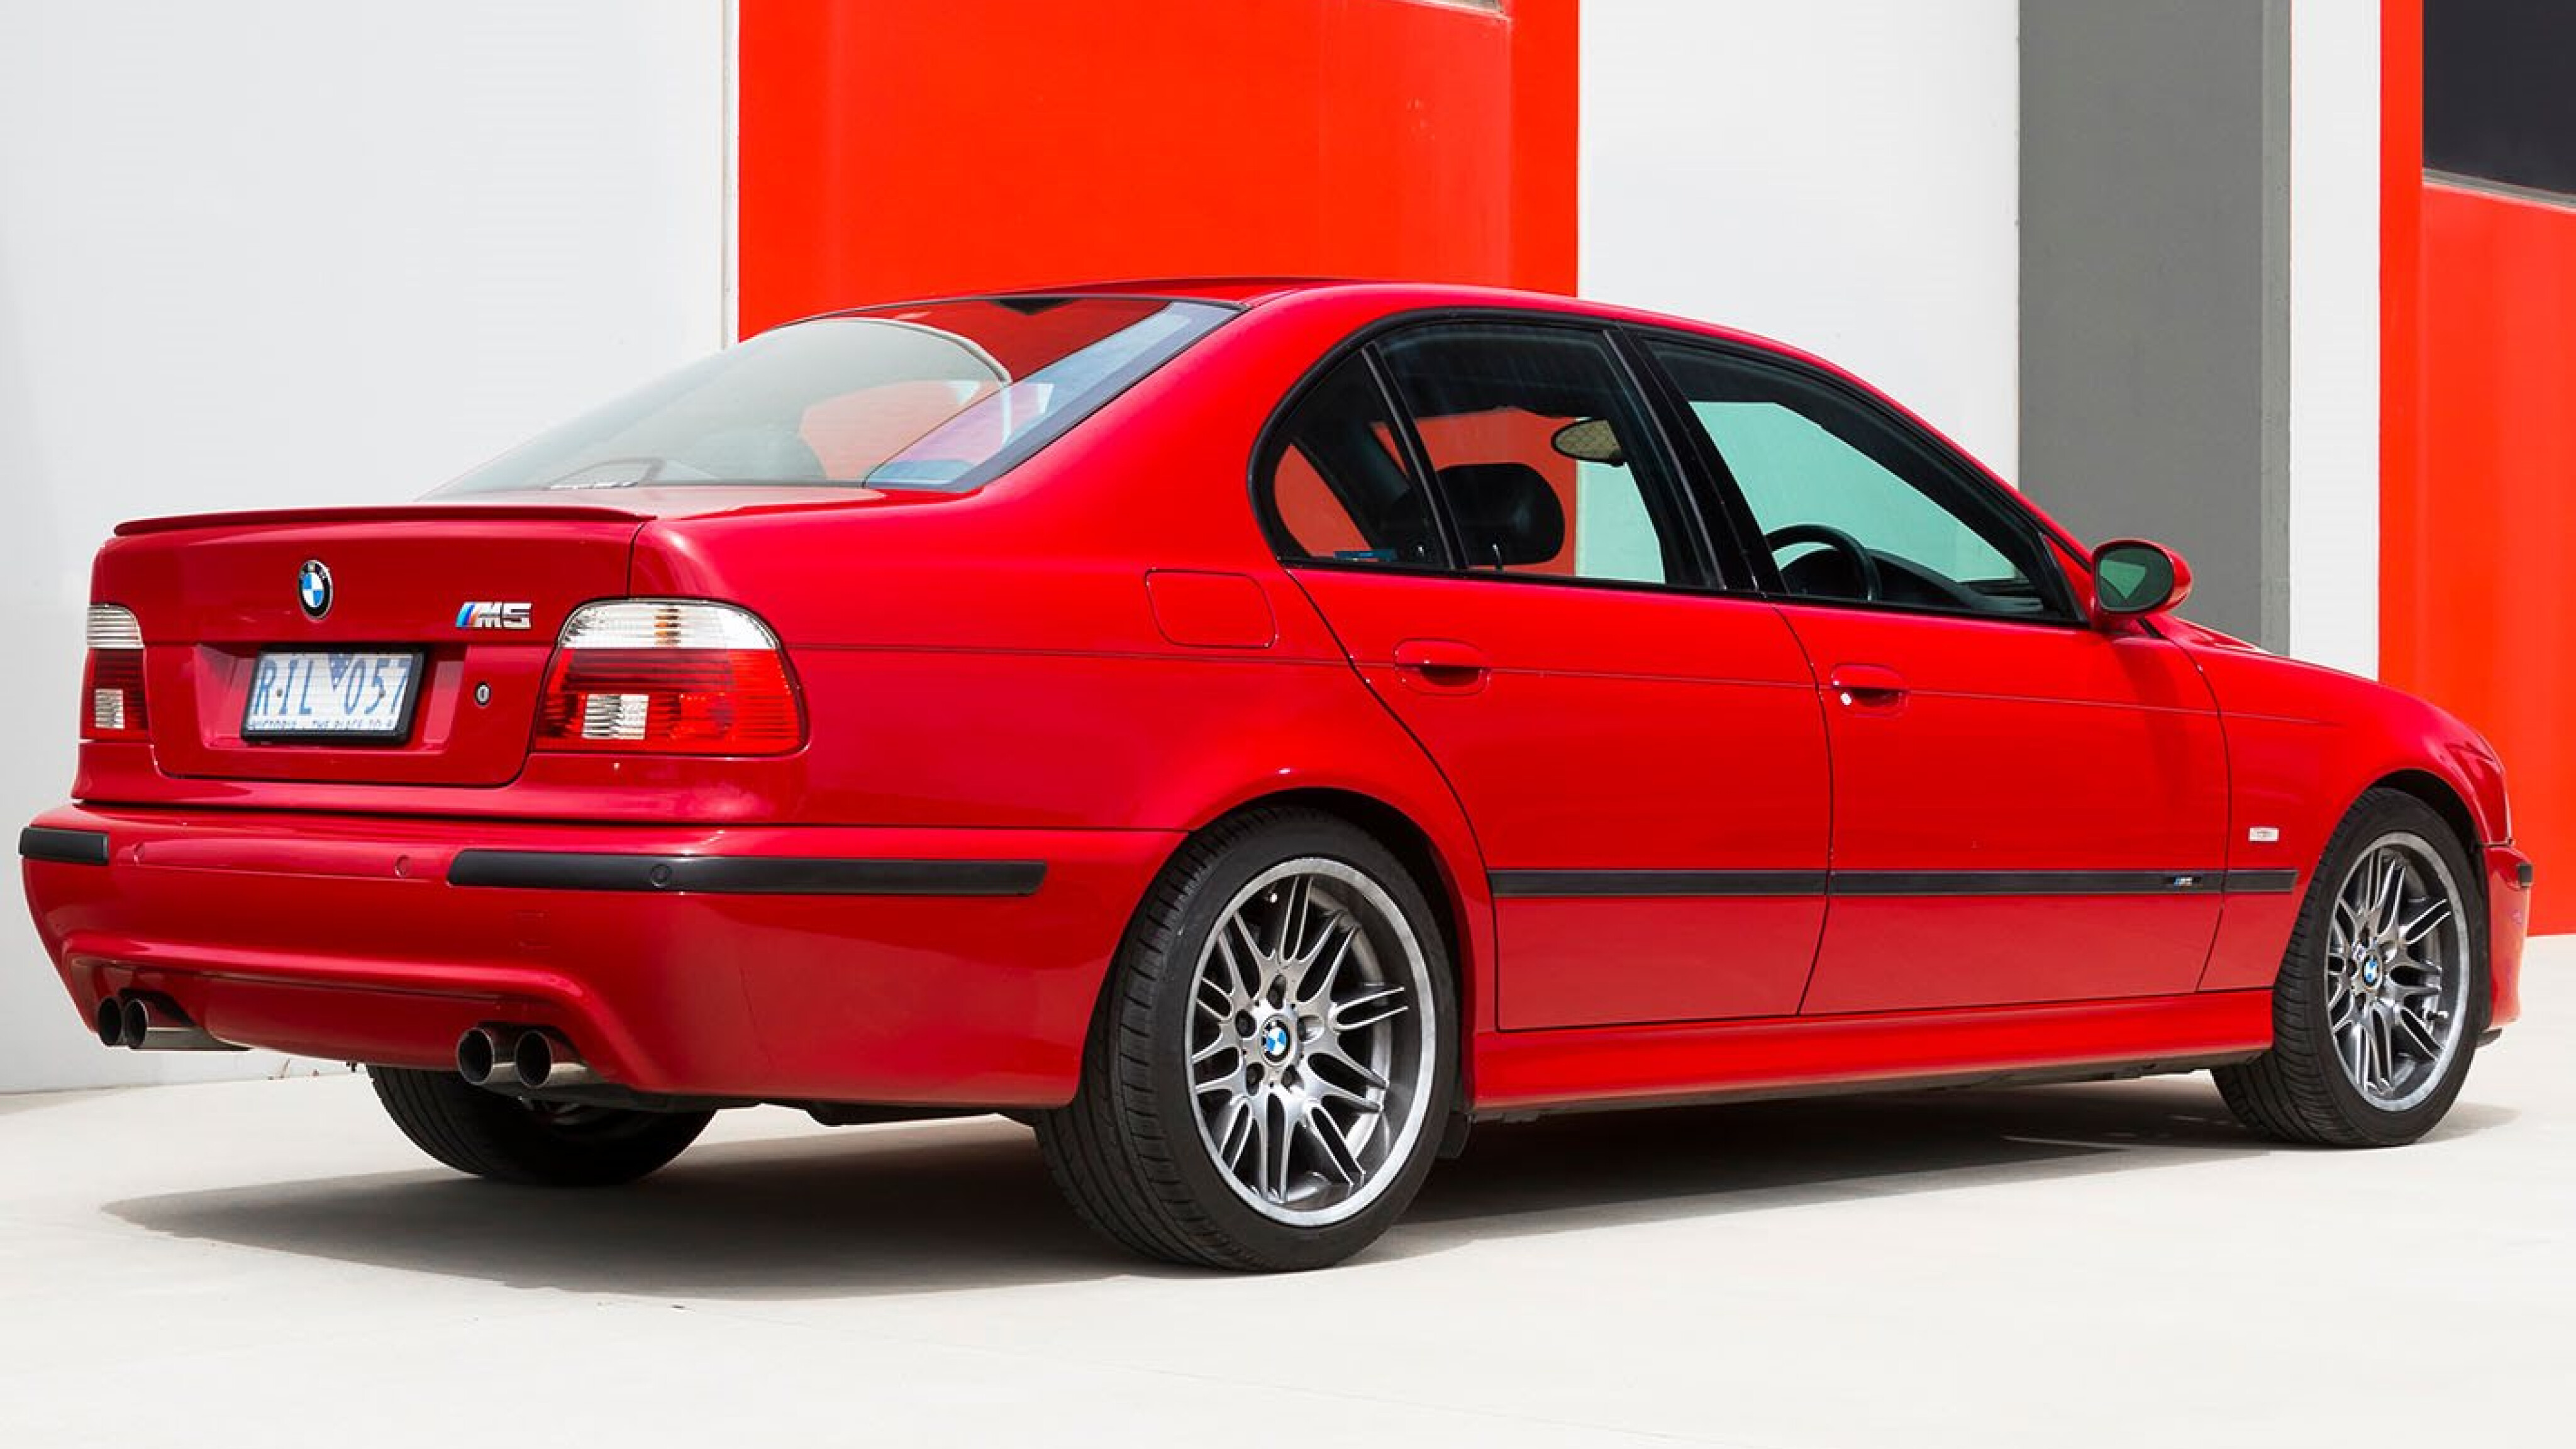 The BMW E39 M5 Is the King of Sport Sedans